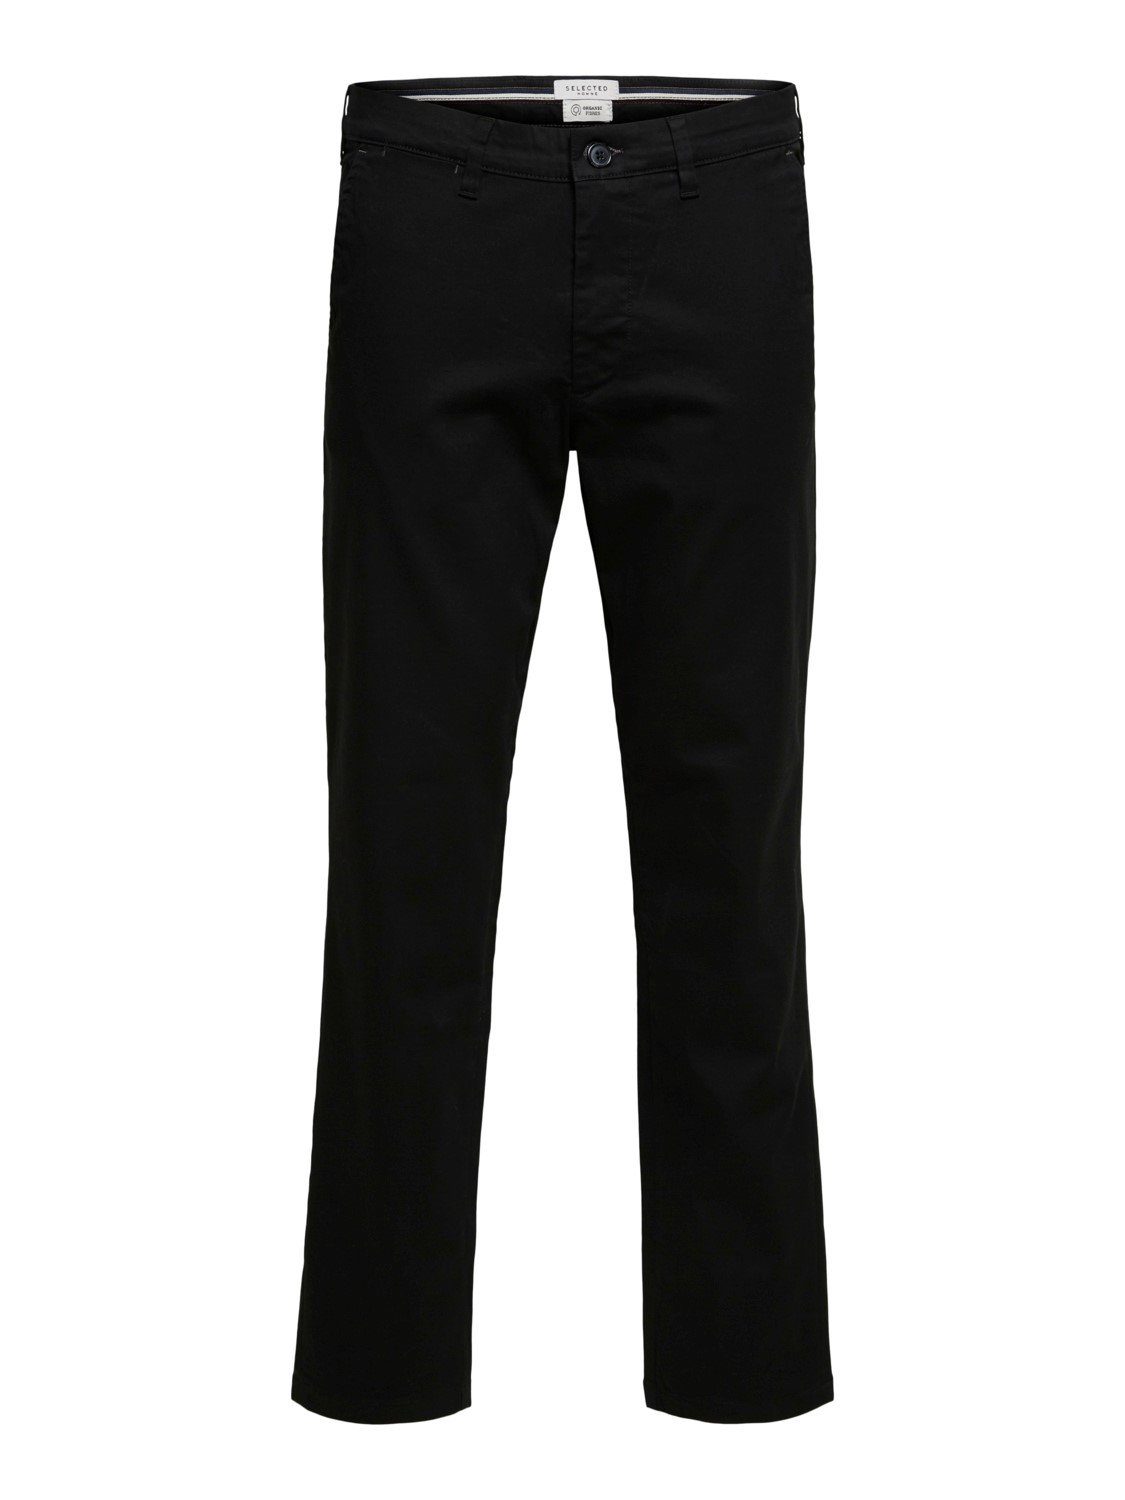 SELECTED HOMME Chinohose MILES FLEX mit Stretch Black (16074054)